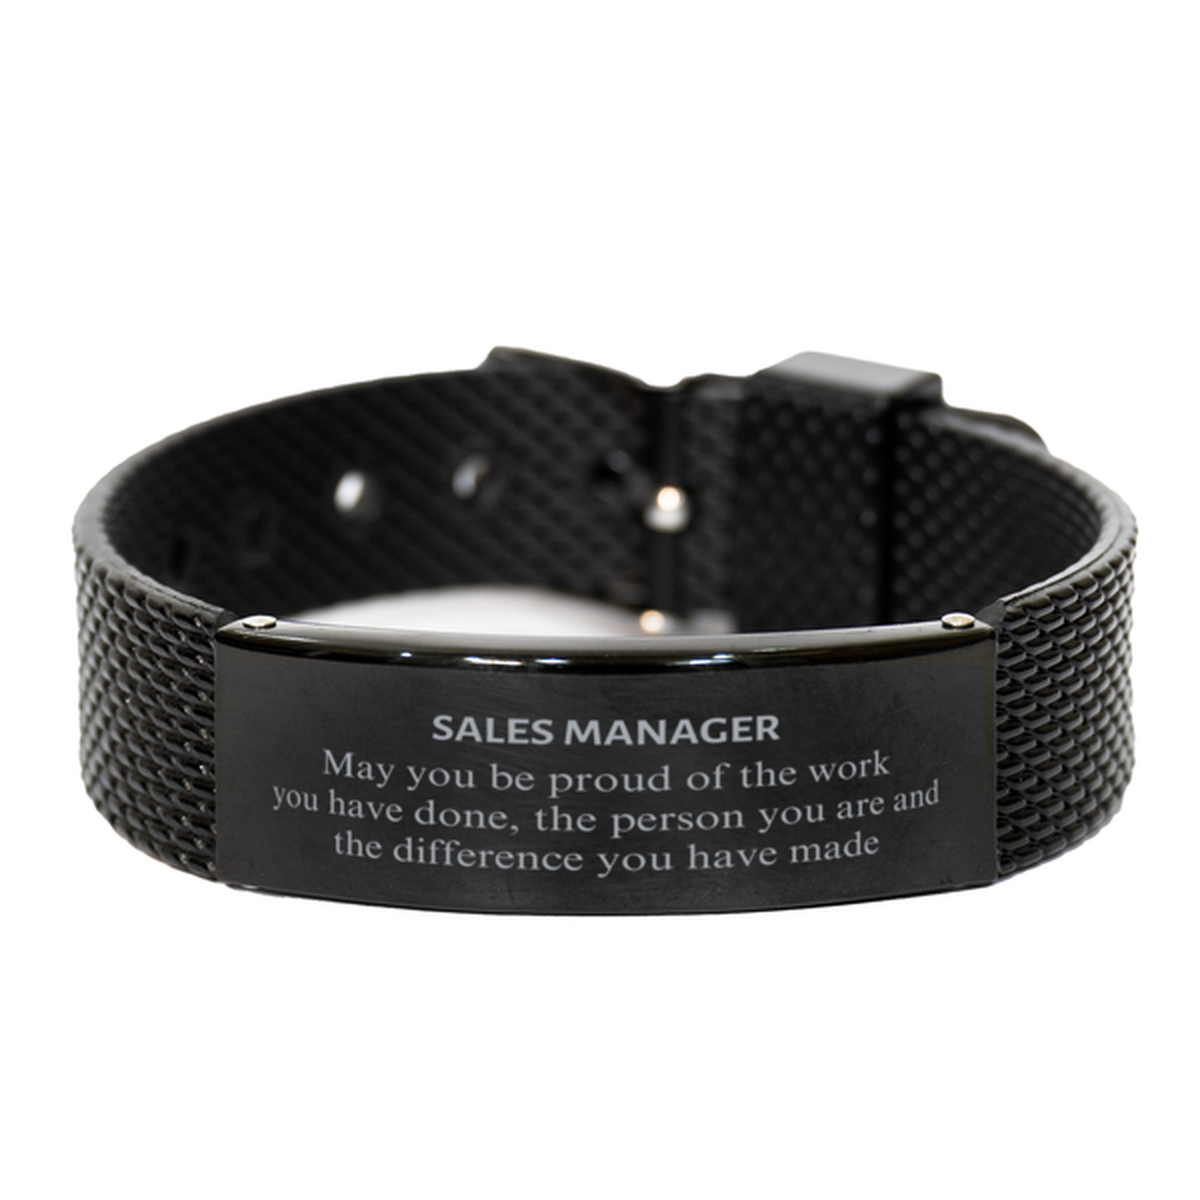 Sales Manager May you be proud of the work you have done, Retirement Sales Manager Black Shark Mesh Bracelet for Colleague Appreciation Gifts Amazing for Sales Manager